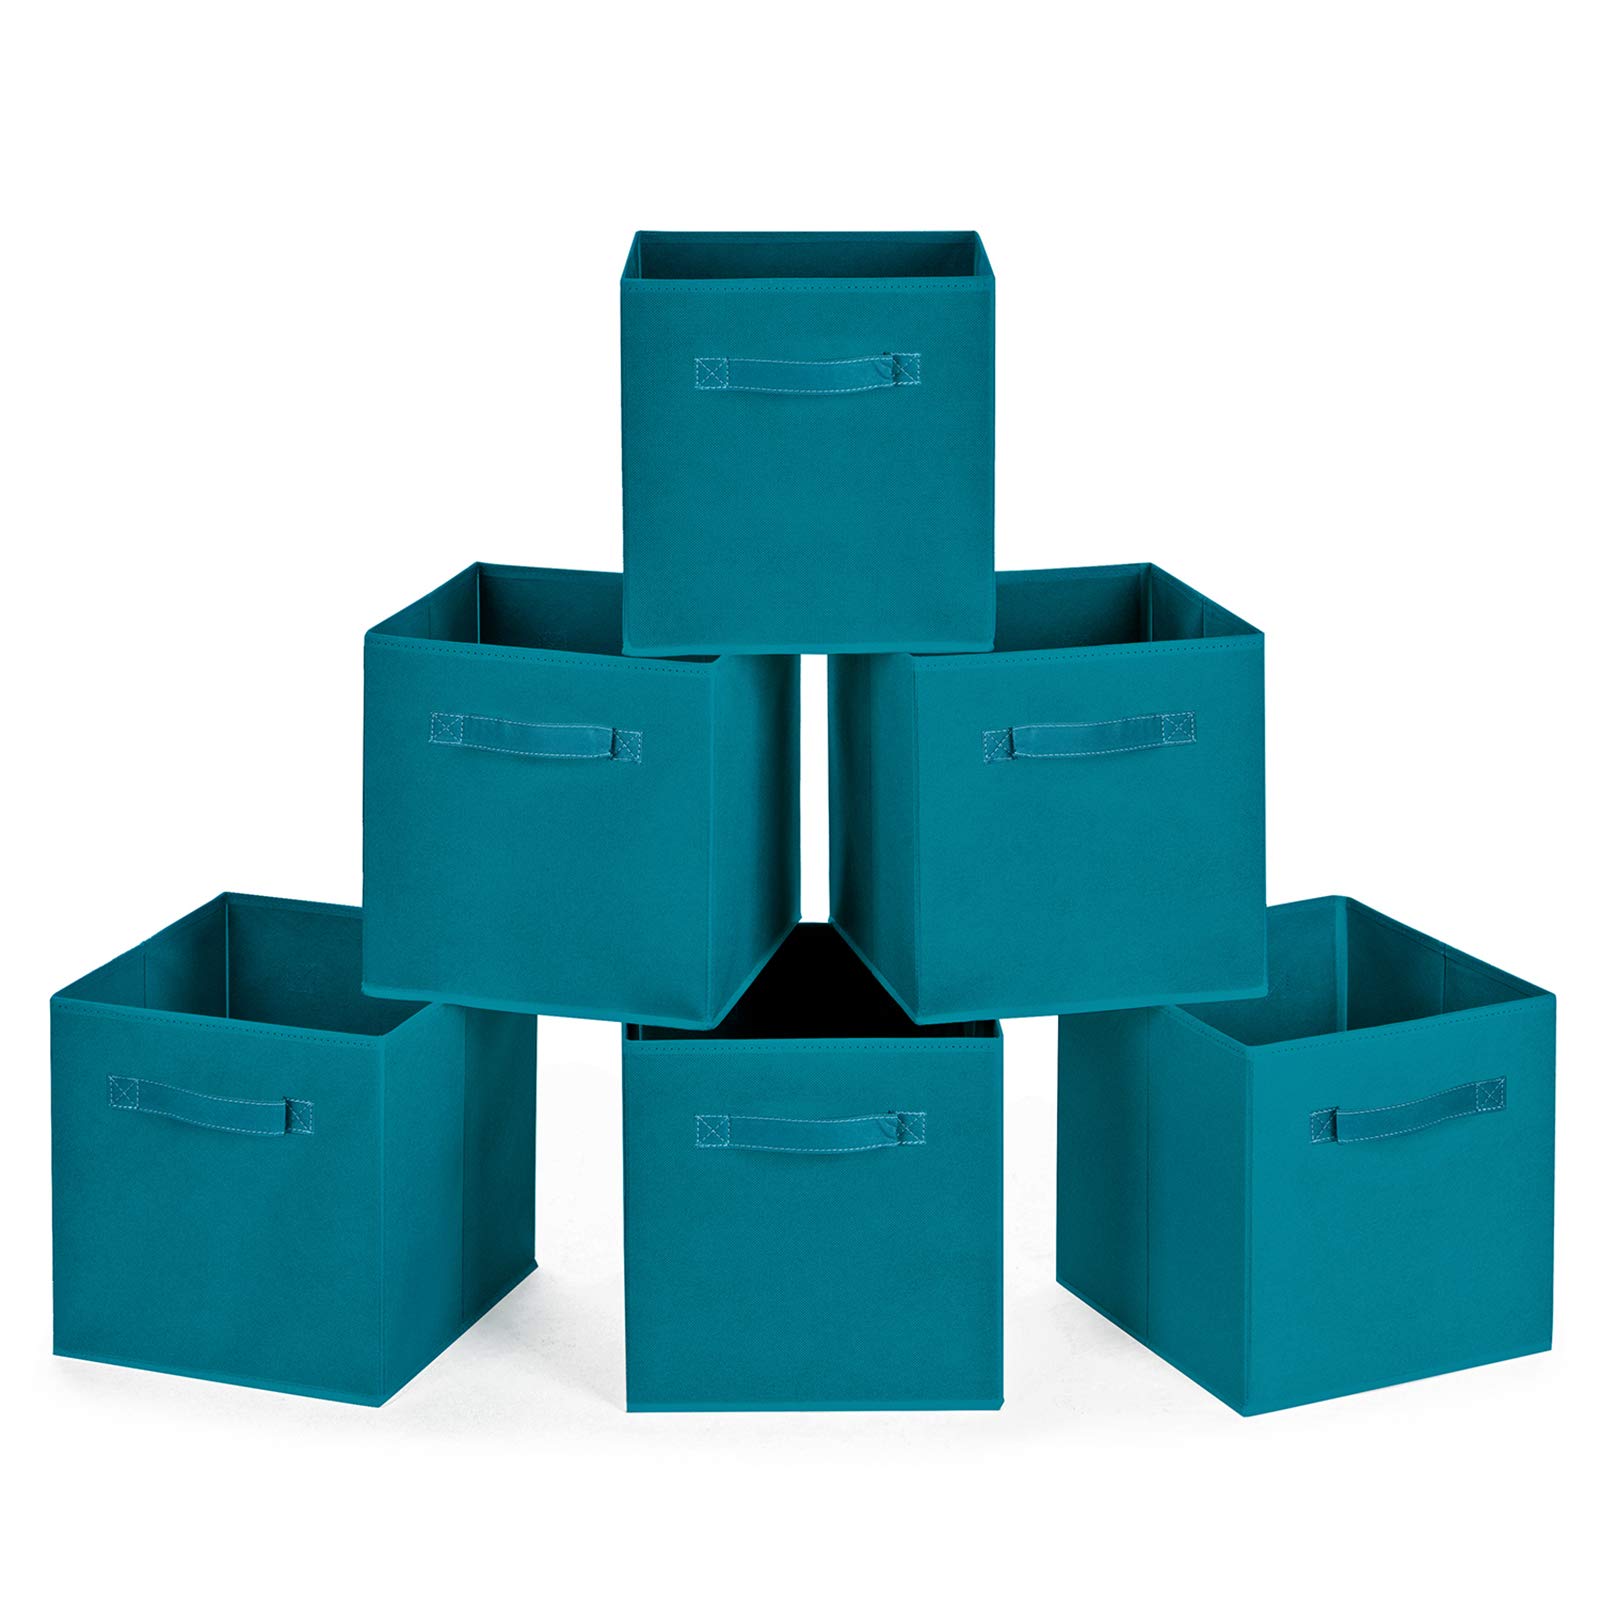 MaidMAX cloth Storage Bins, Set of 6 Foldable collapsible Fabric cubes Organizers Basket with Dual Handles for gift, Teal